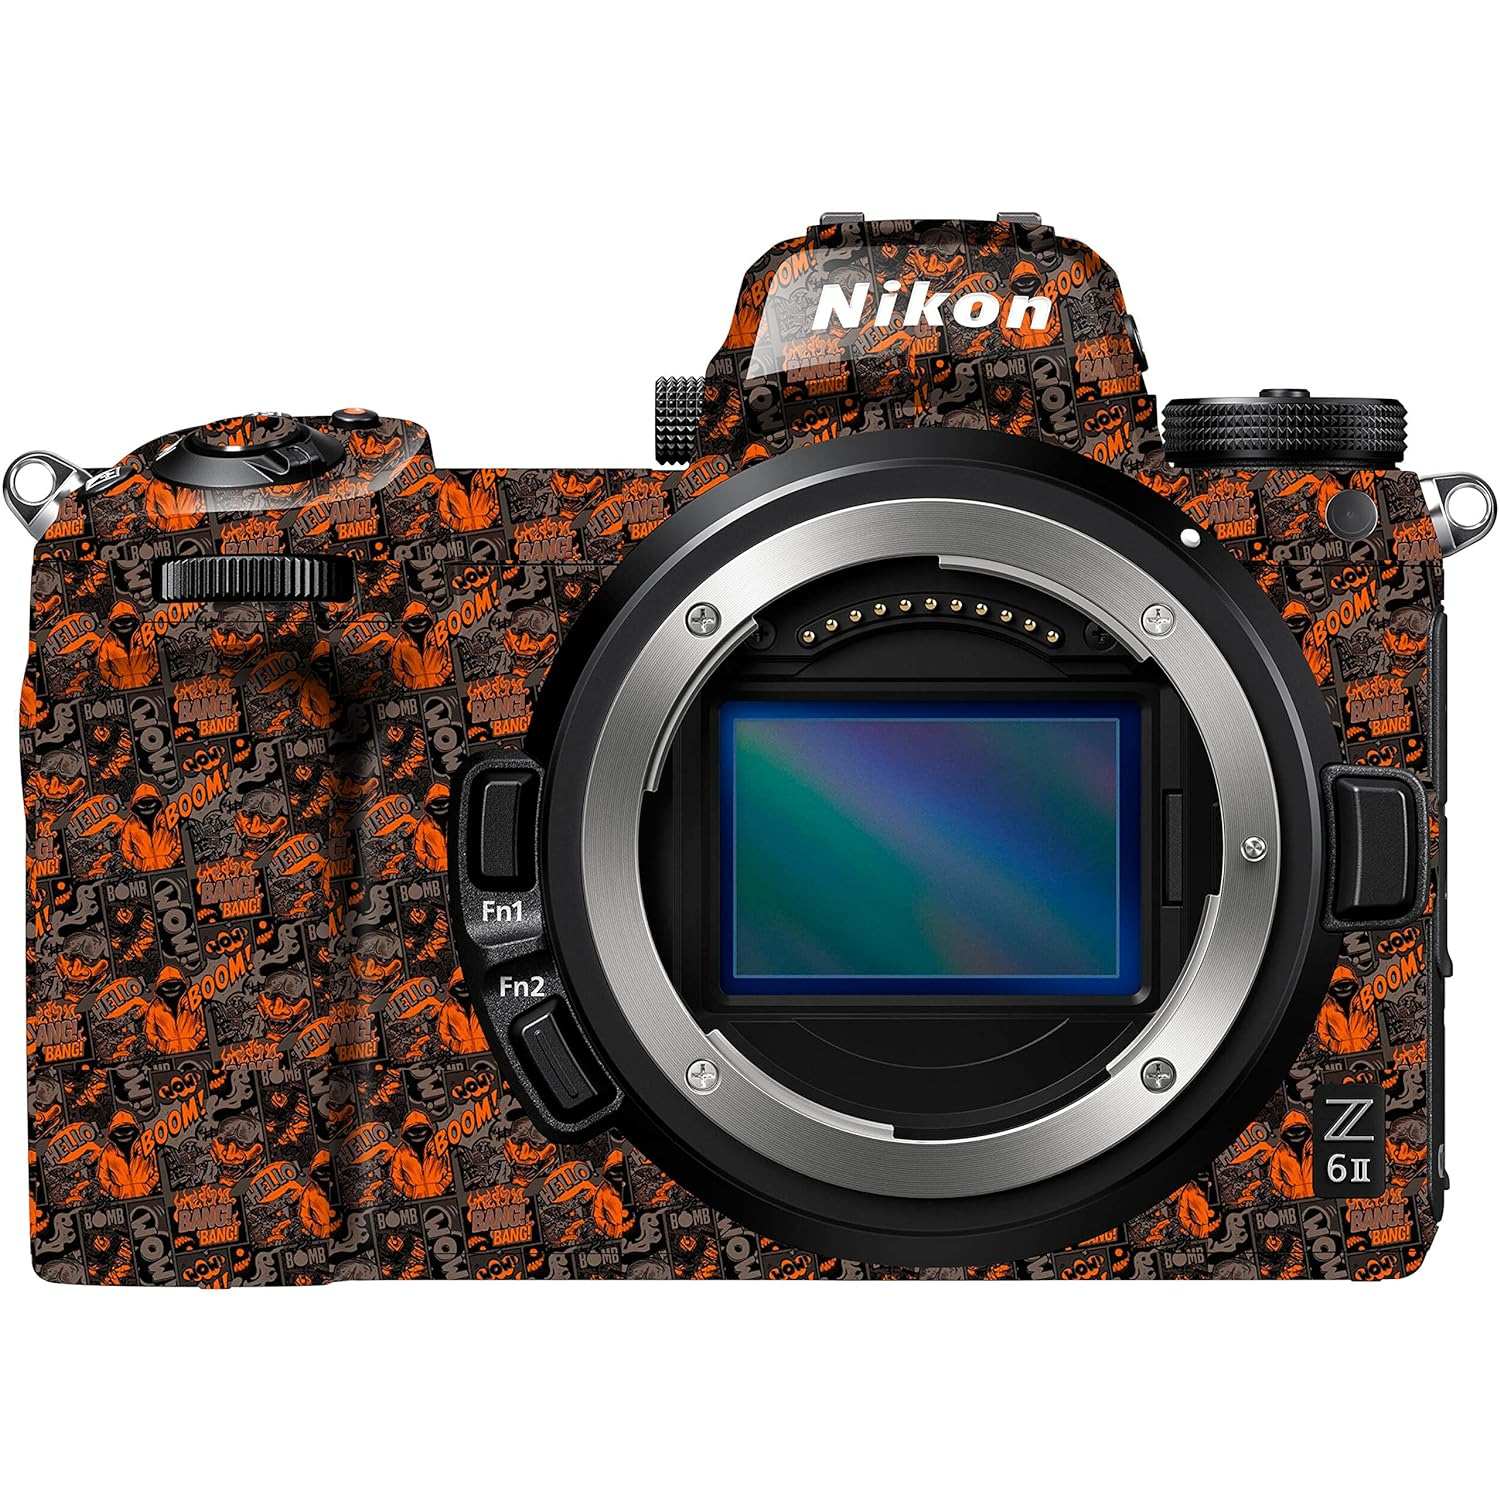 Read more about the article WRAPTURE. Premium DSLR Camera Scratchproof Protective Skin for Nikon Z6 ii – No Residue Removal, Bubble Free, Scratch Resistant, Stretchable, HD Quality Printed – HDCS 032